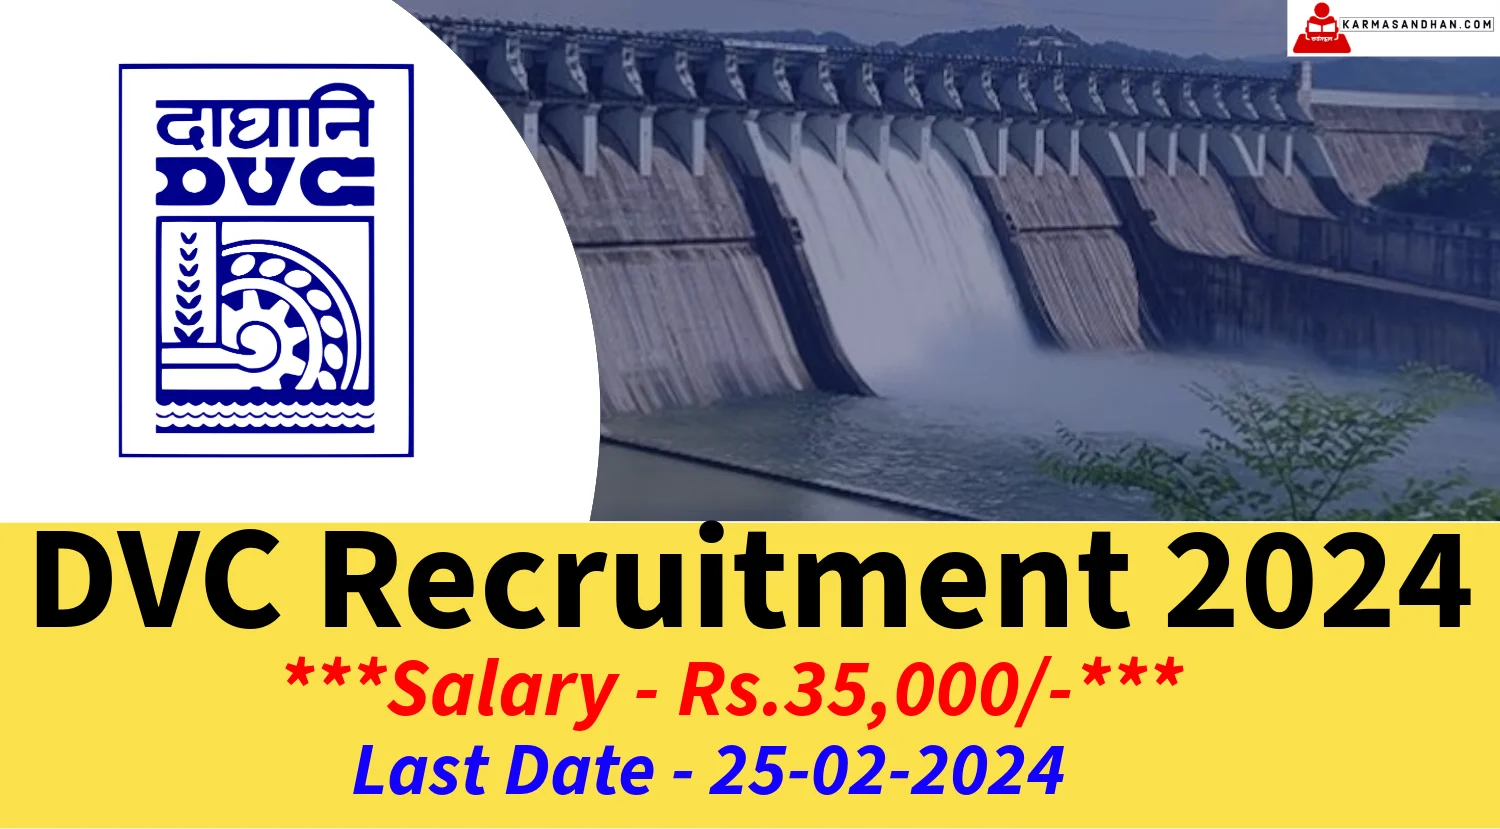 Monthly Salary Up to 75000, Check Posts, Qualification and Apply Now – Karmasandhan